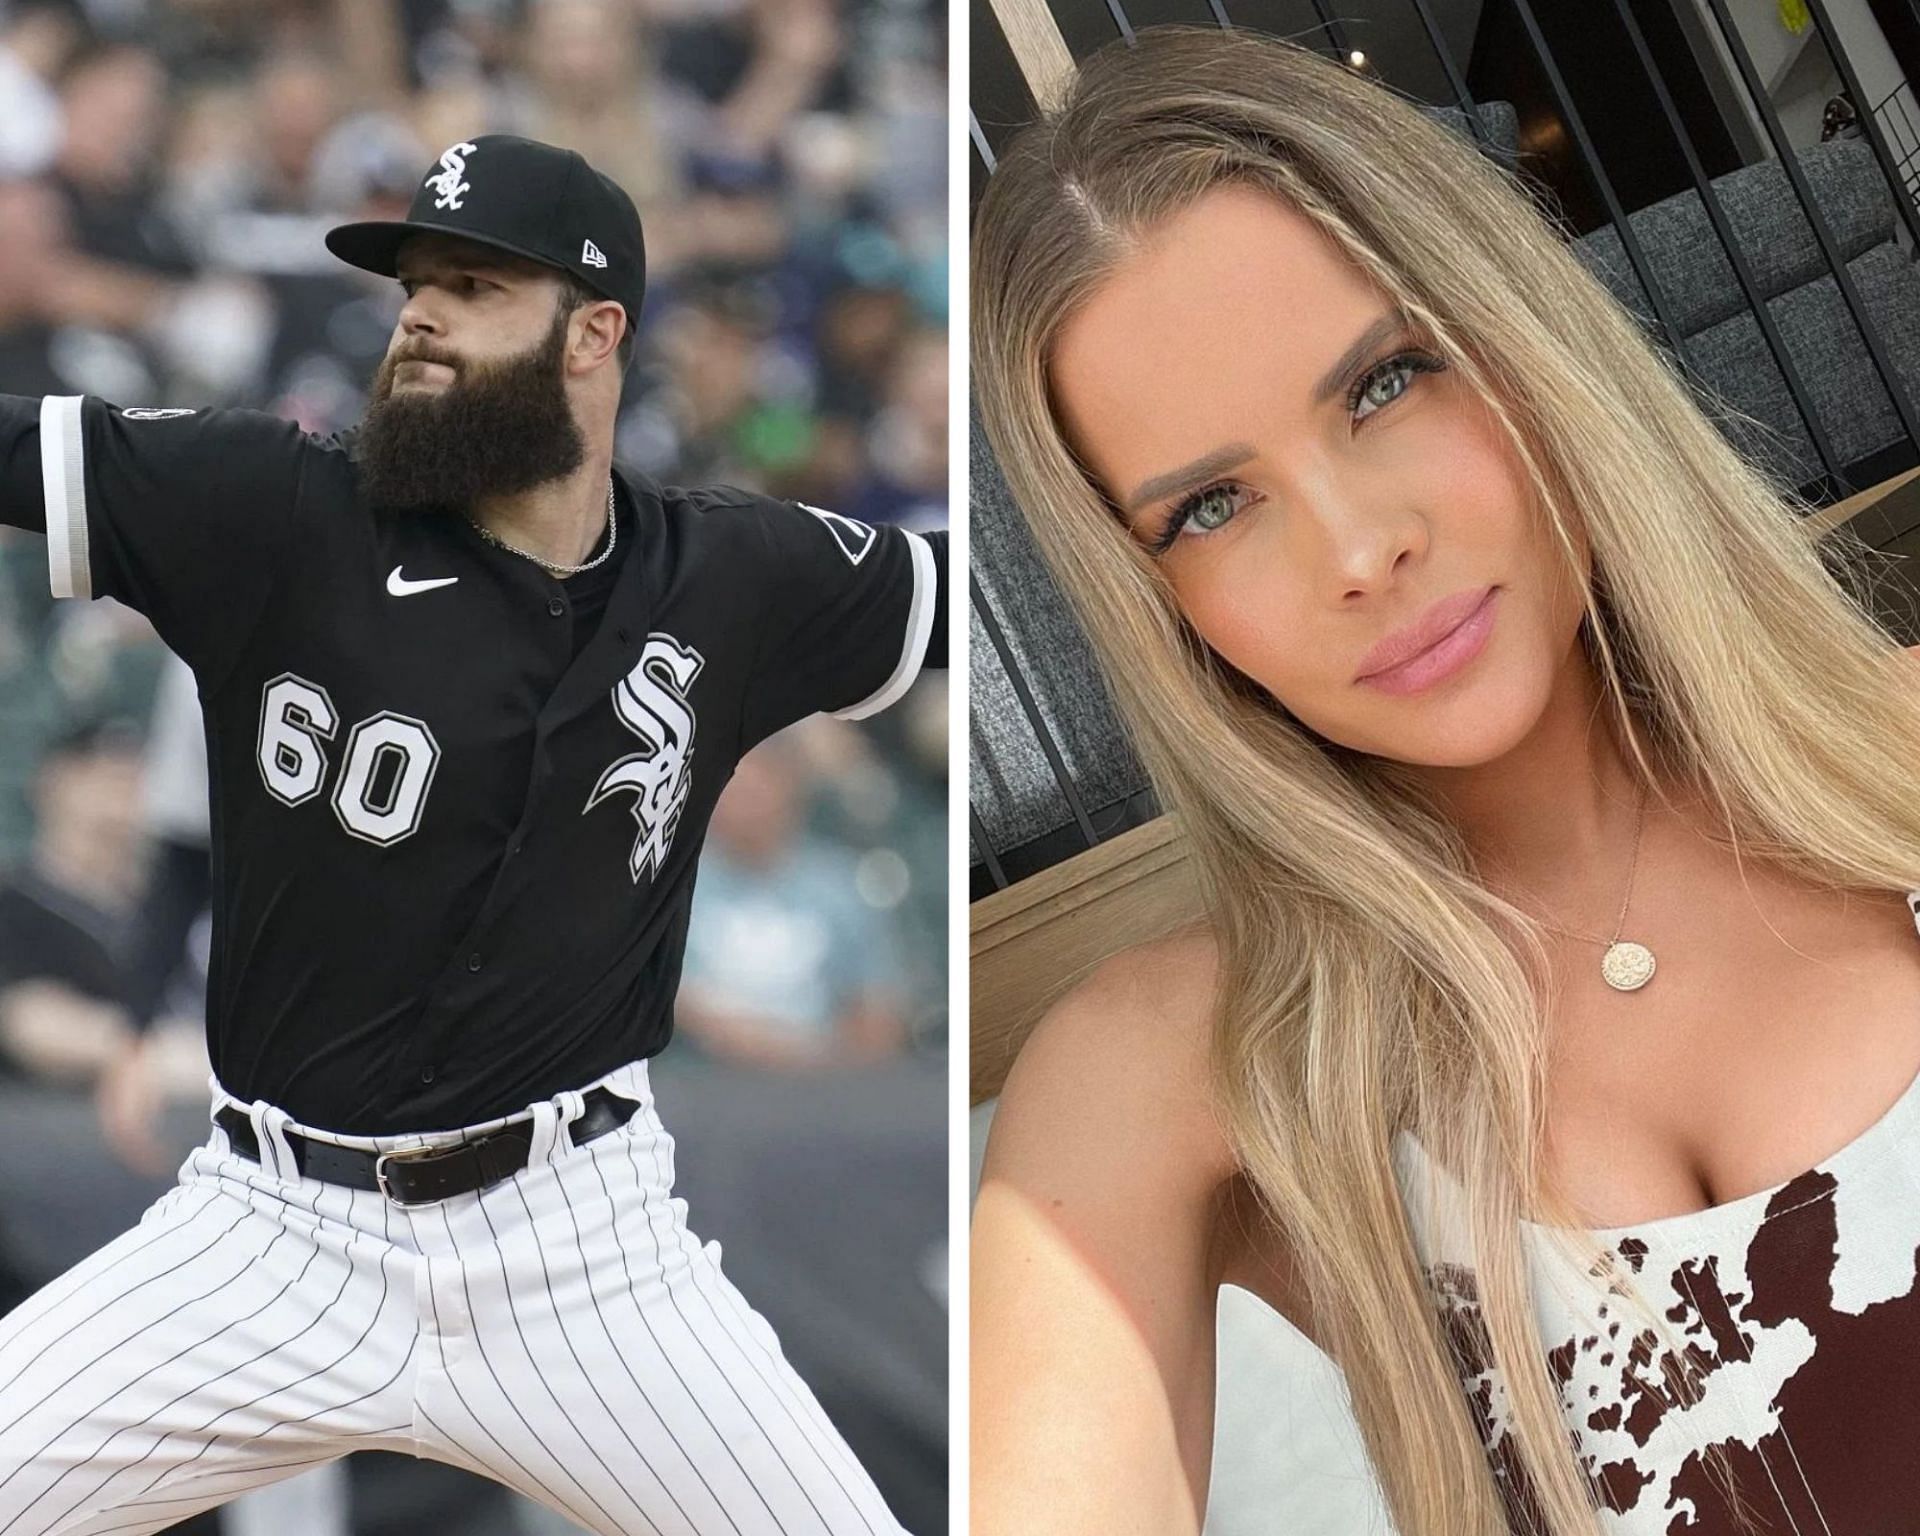 MLB Network host Kelly Nash knocks it out of the park by